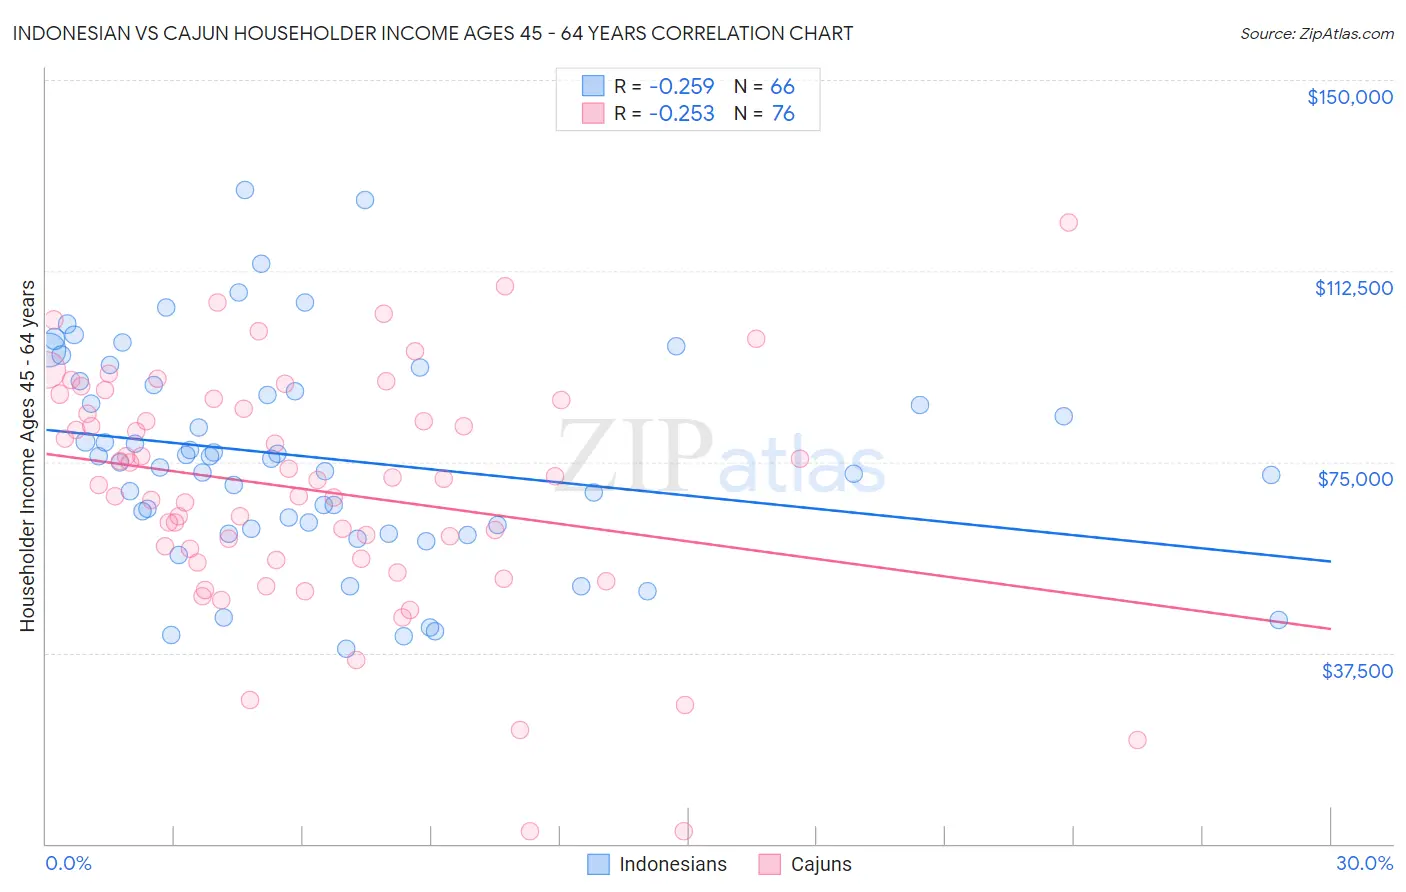 Indonesian vs Cajun Householder Income Ages 45 - 64 years